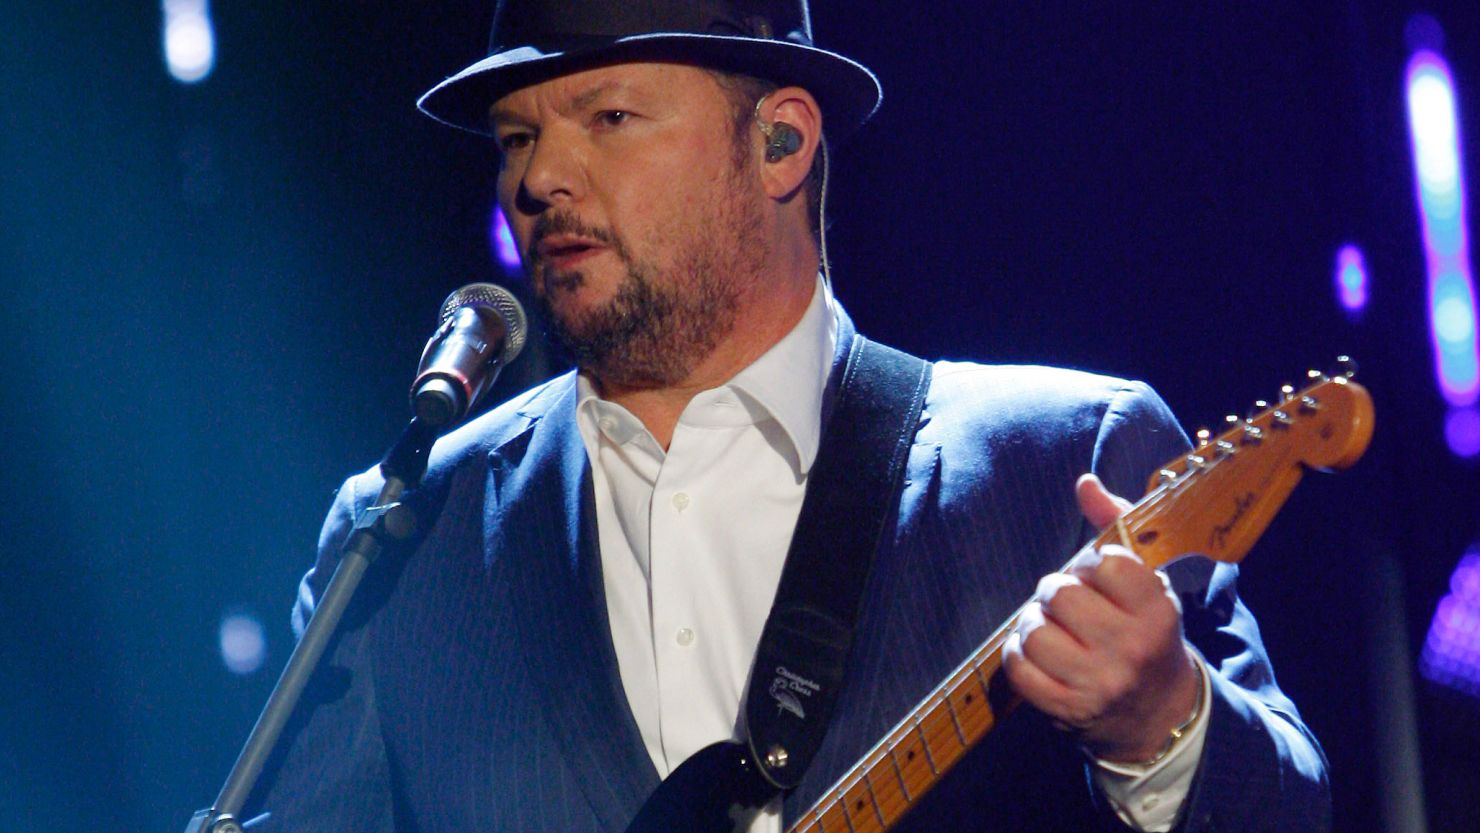 Musician Christopher Cross announced in a Facebook post Sunday that he has coronavirus.